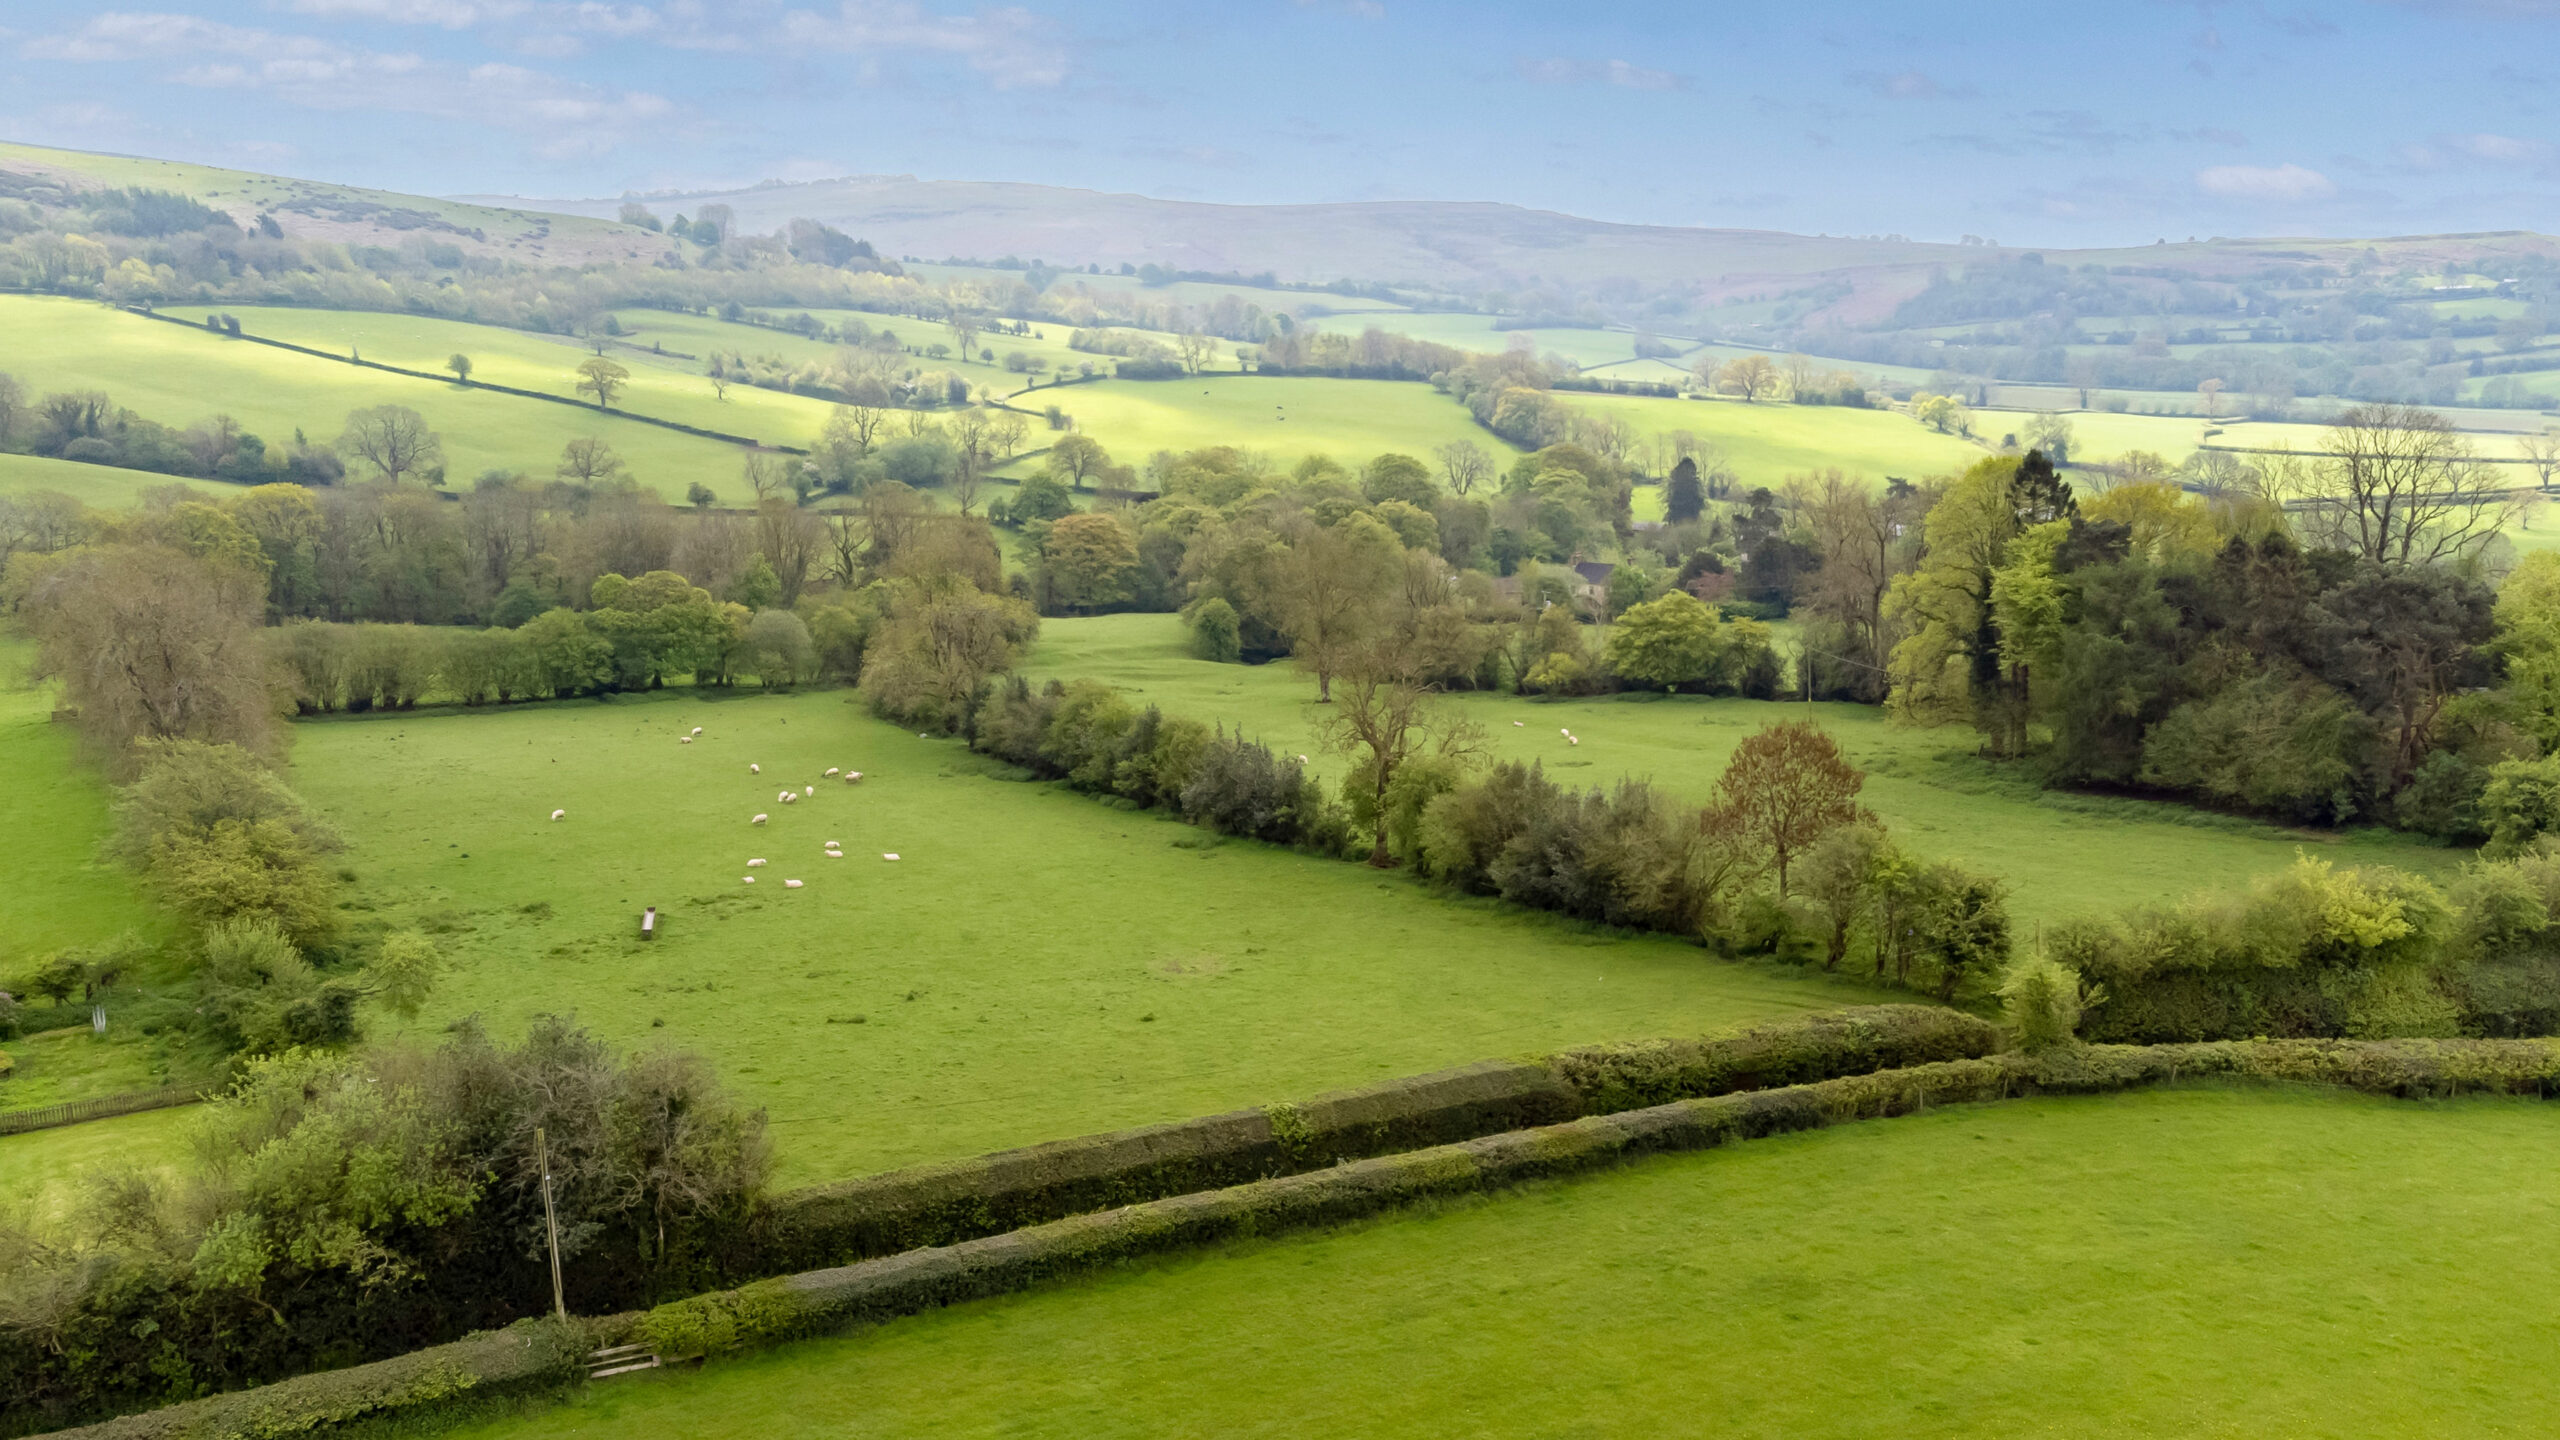 Lot 2 & 3 at Upper House Farm – Land in South Shropshire